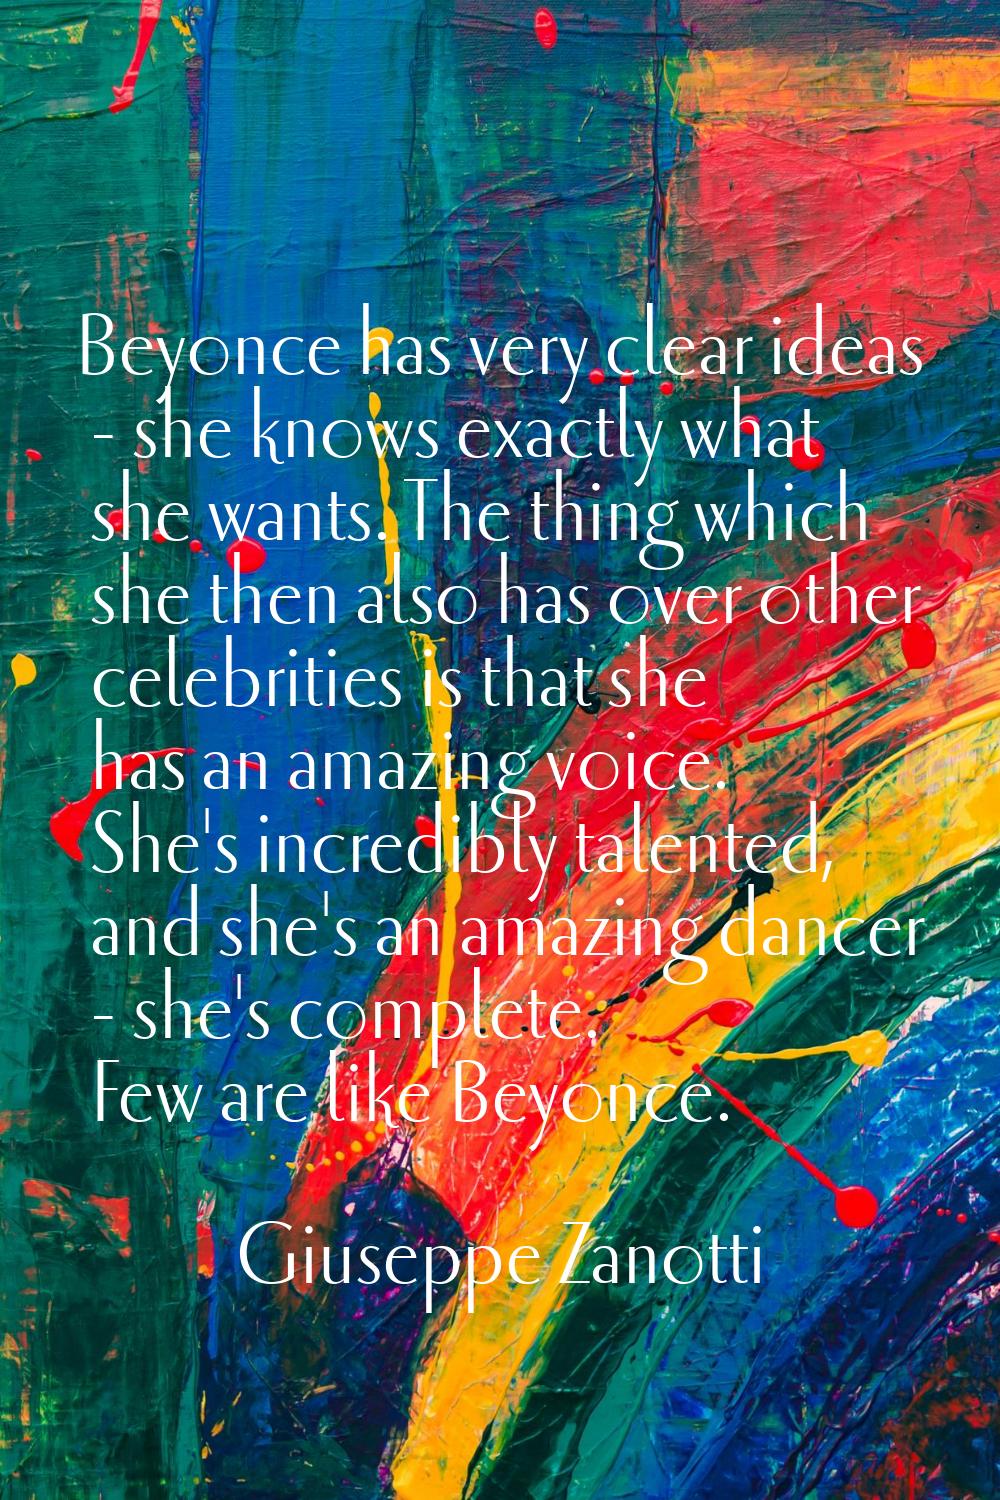 Beyonce has very clear ideas - she knows exactly what she wants. The thing which she then also has 